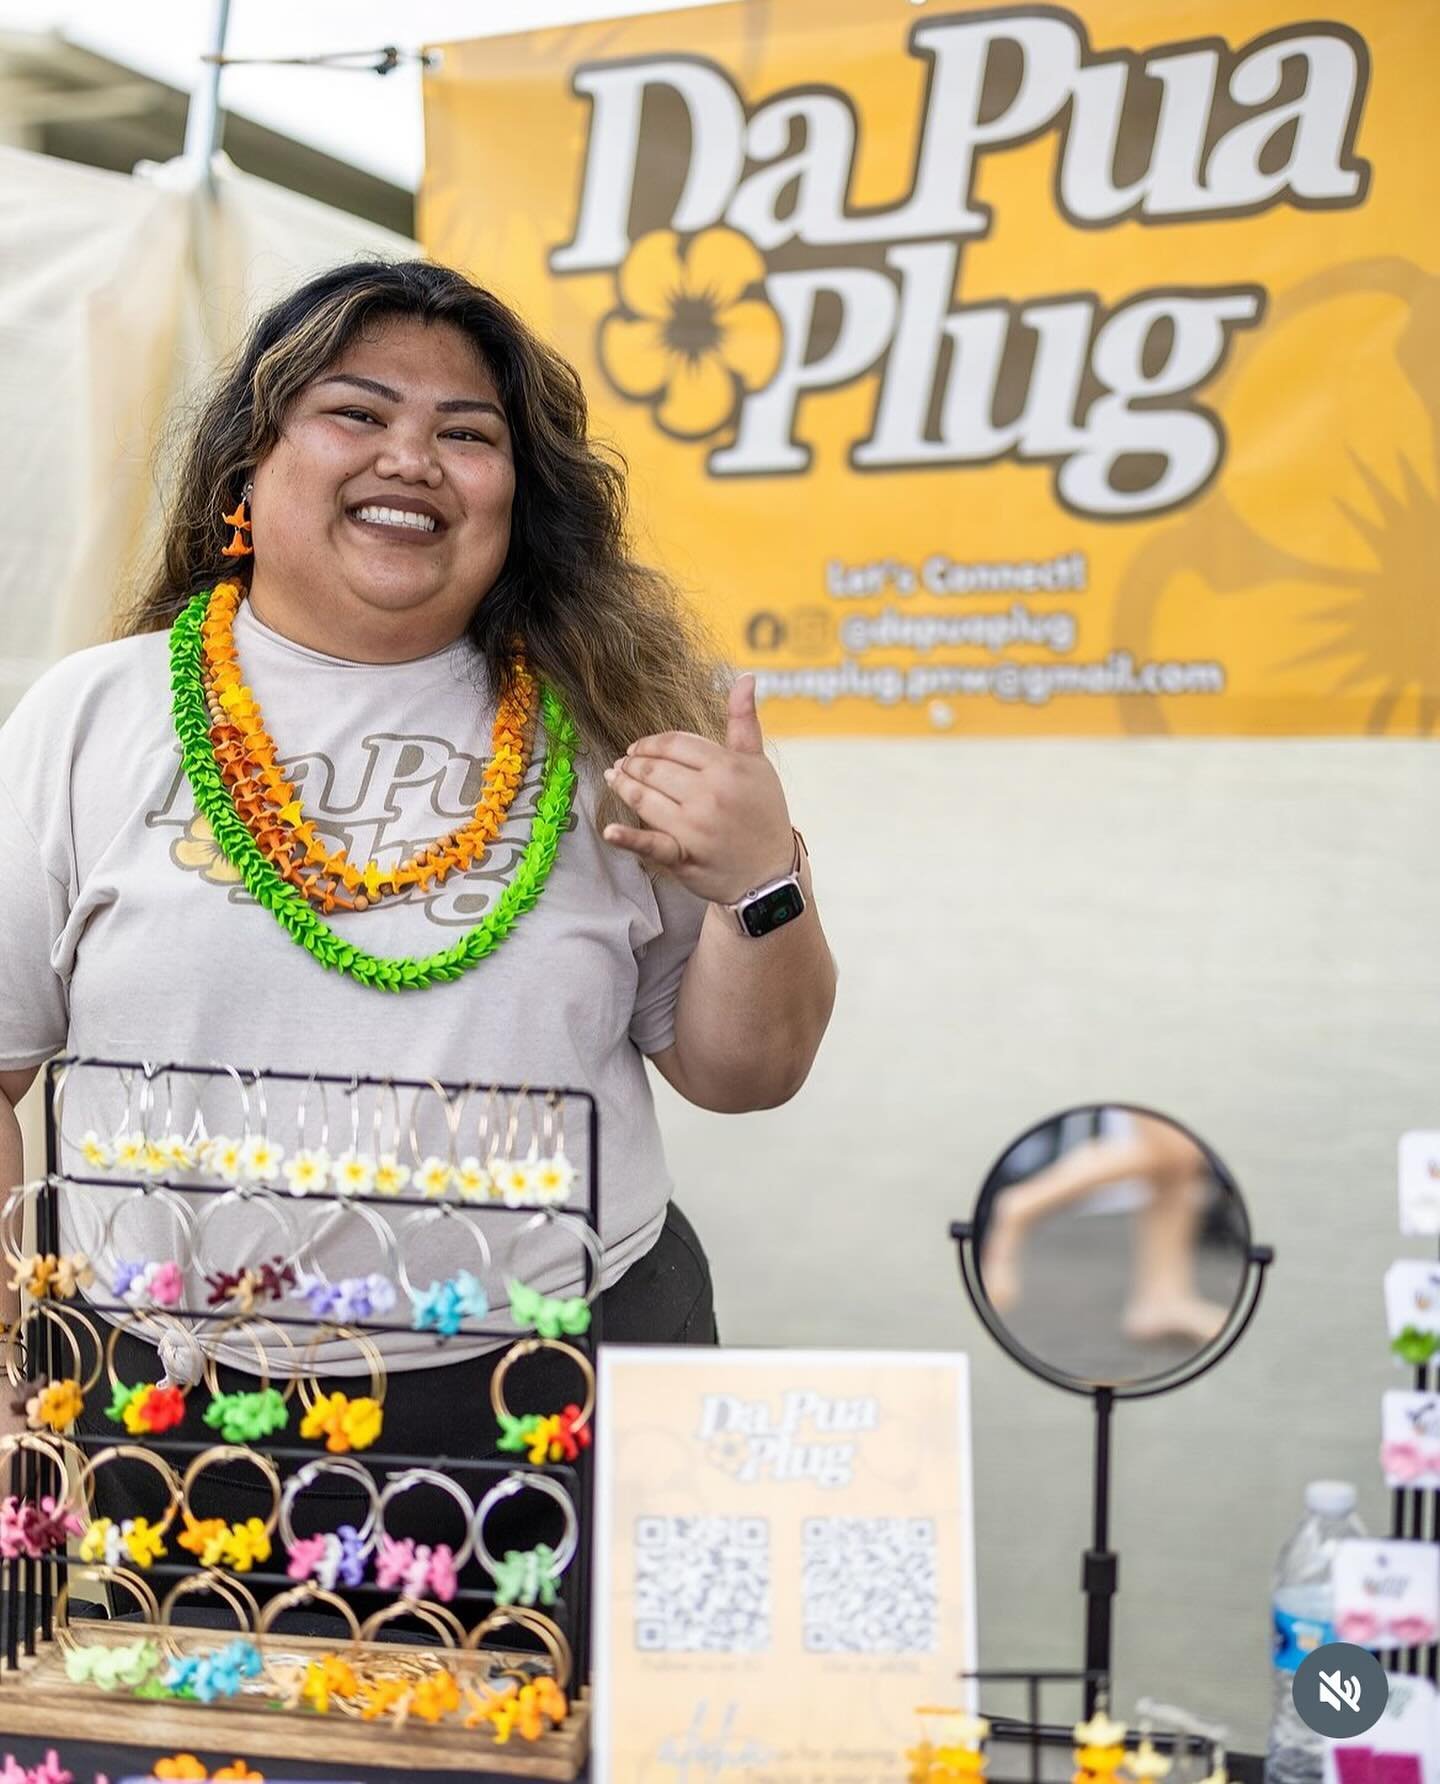 ✨ VENDOR HIGHLIGHT ✨

Joining us at A Lei For Mama, we have @dapuaplug 

You will find handmade polymer clay earrings- such as studs, bombucha pua hoops, a build-your-own hoops station (day of event), and diy kits that you can take &amp; make at home